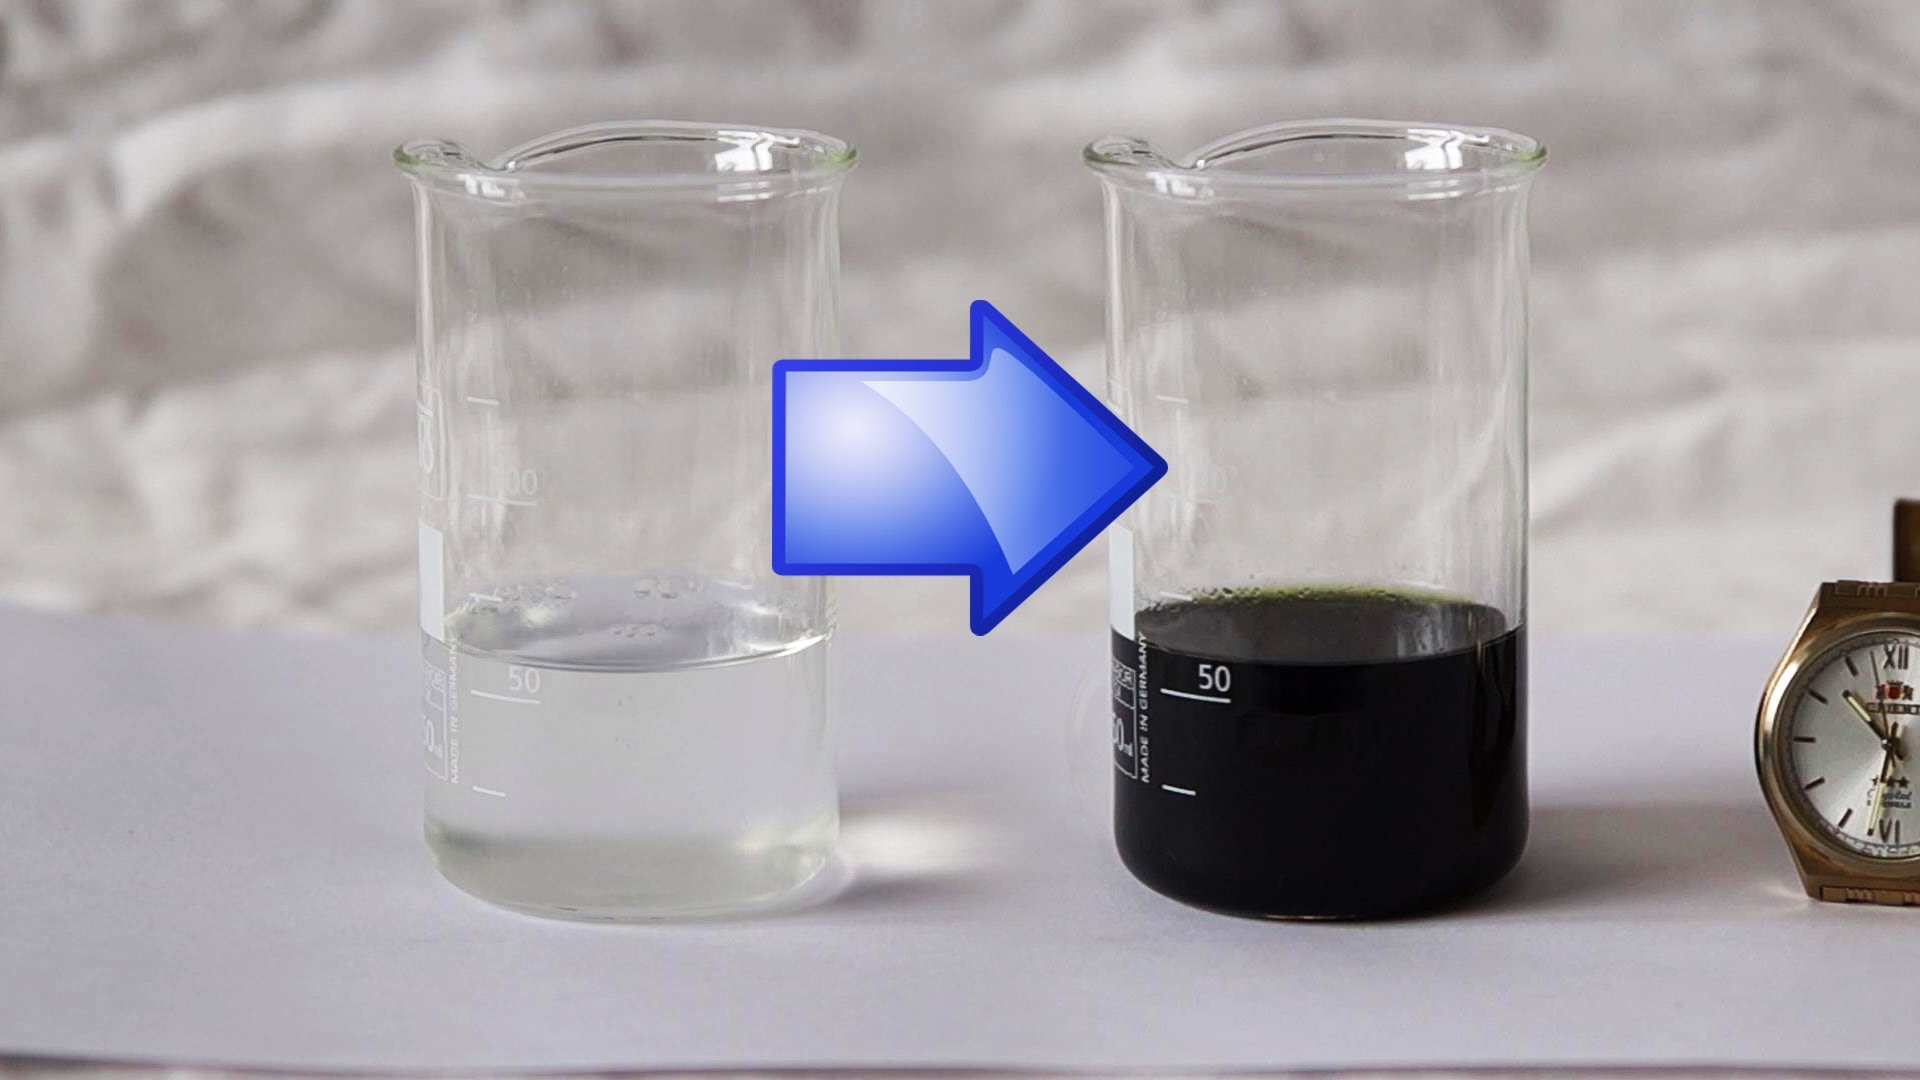 Iodine Clock Reaction Chemical Experiment! - YouTube